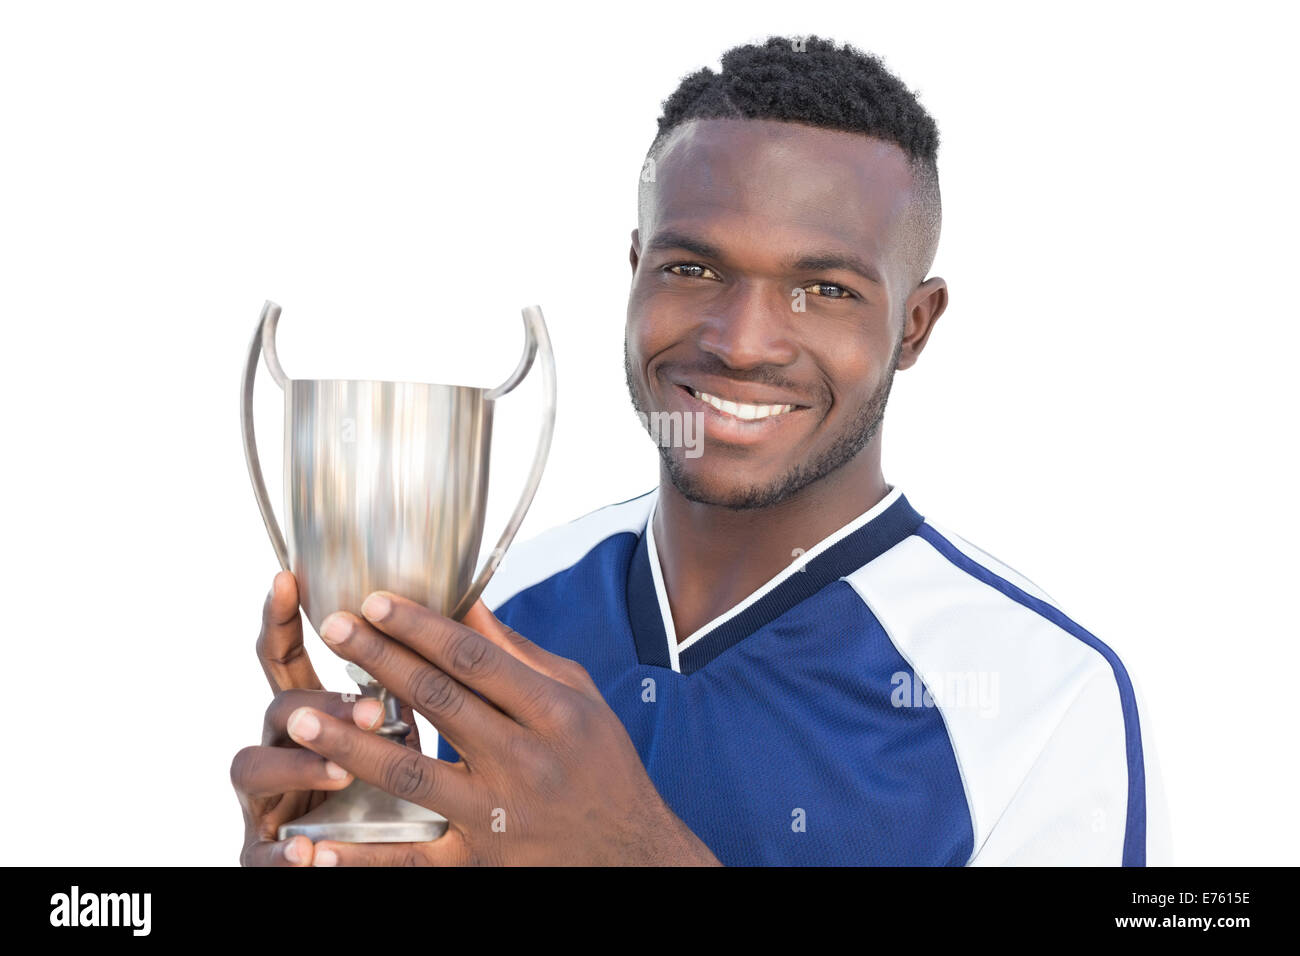 Football player holding winners cup Stock Photo